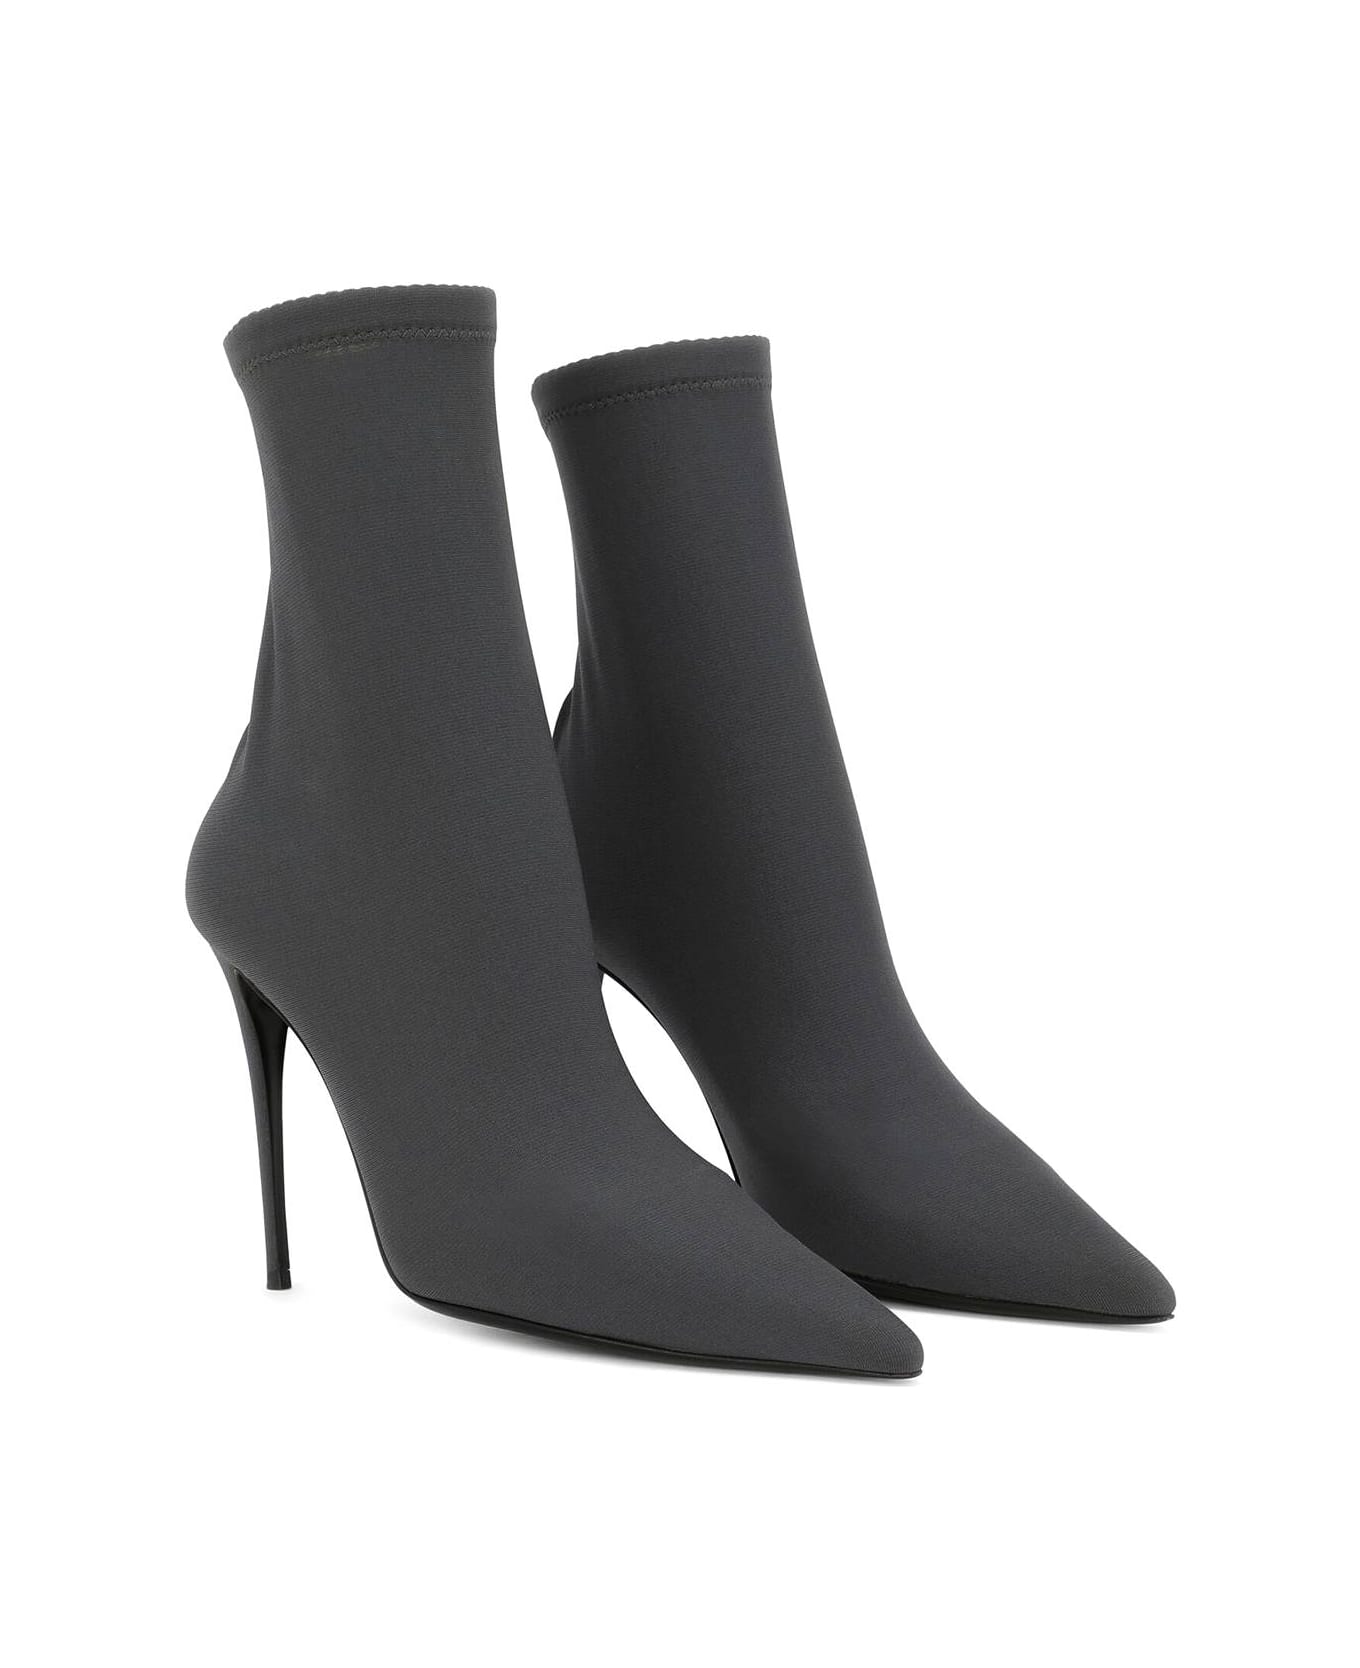 Dolce & Gabbana Stretch Jersey Ankle Boots - Grigio